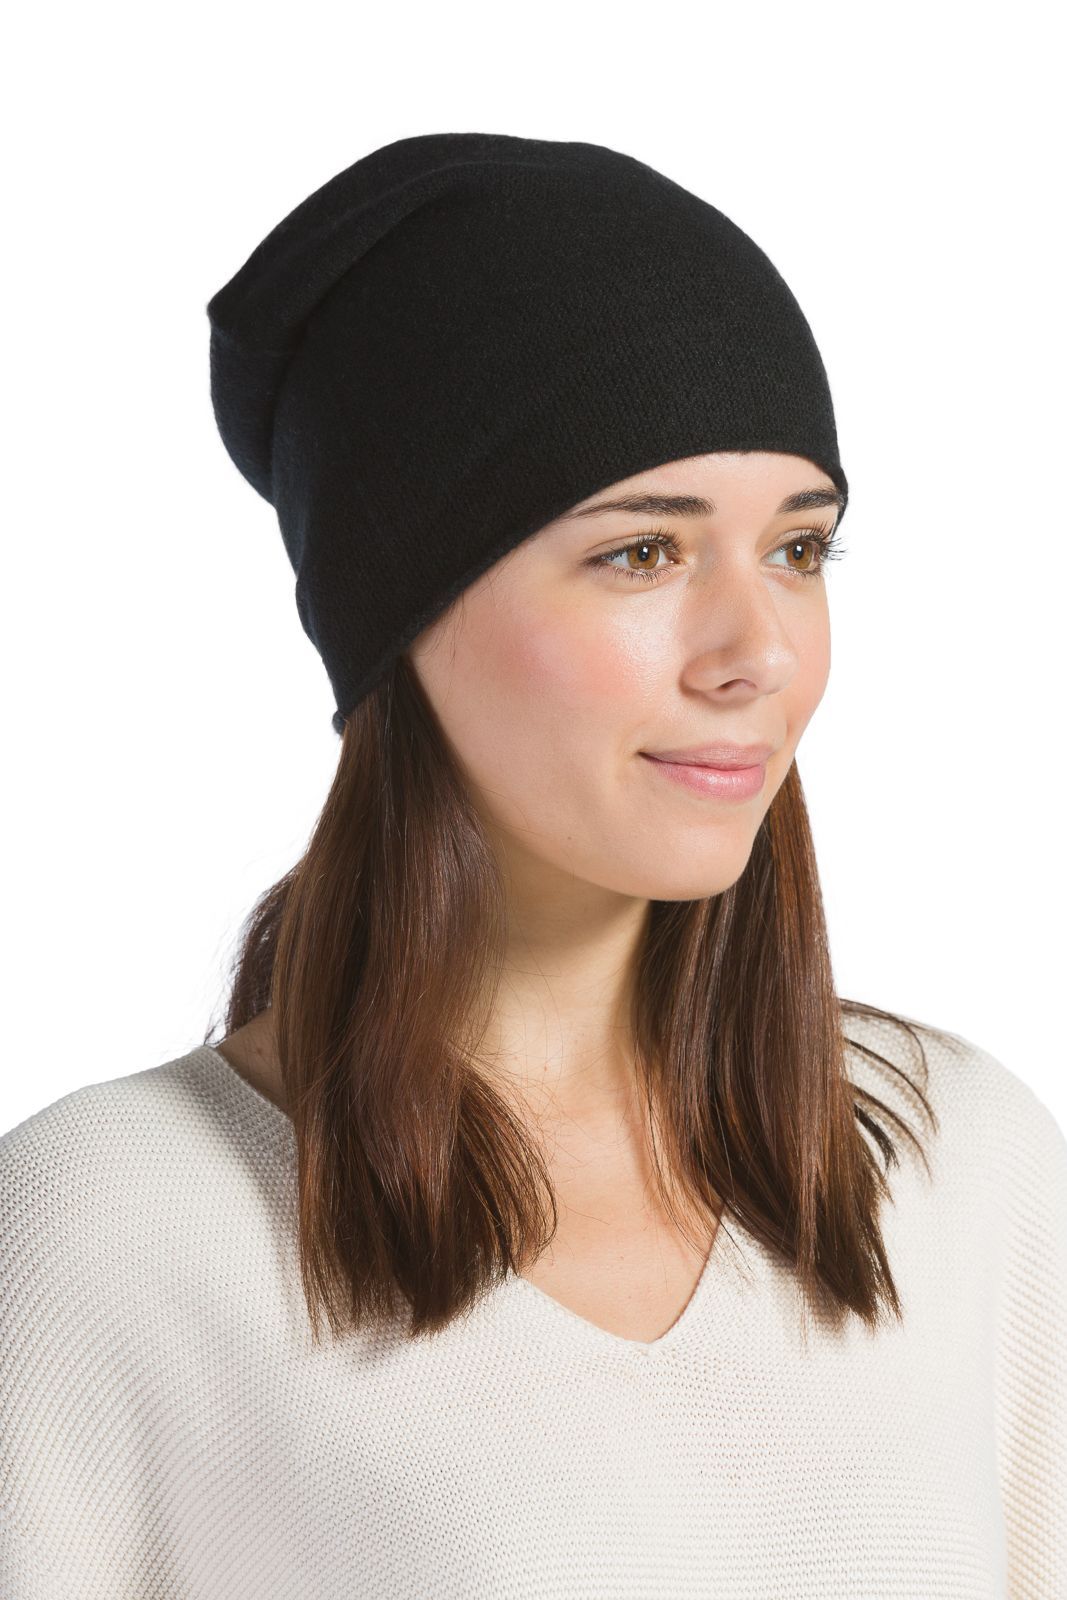 Women's 100% Cashmere Slouchy Beanie Hat Womens>Accessories>Hat Fishers Finery Black One Size Fits Most 